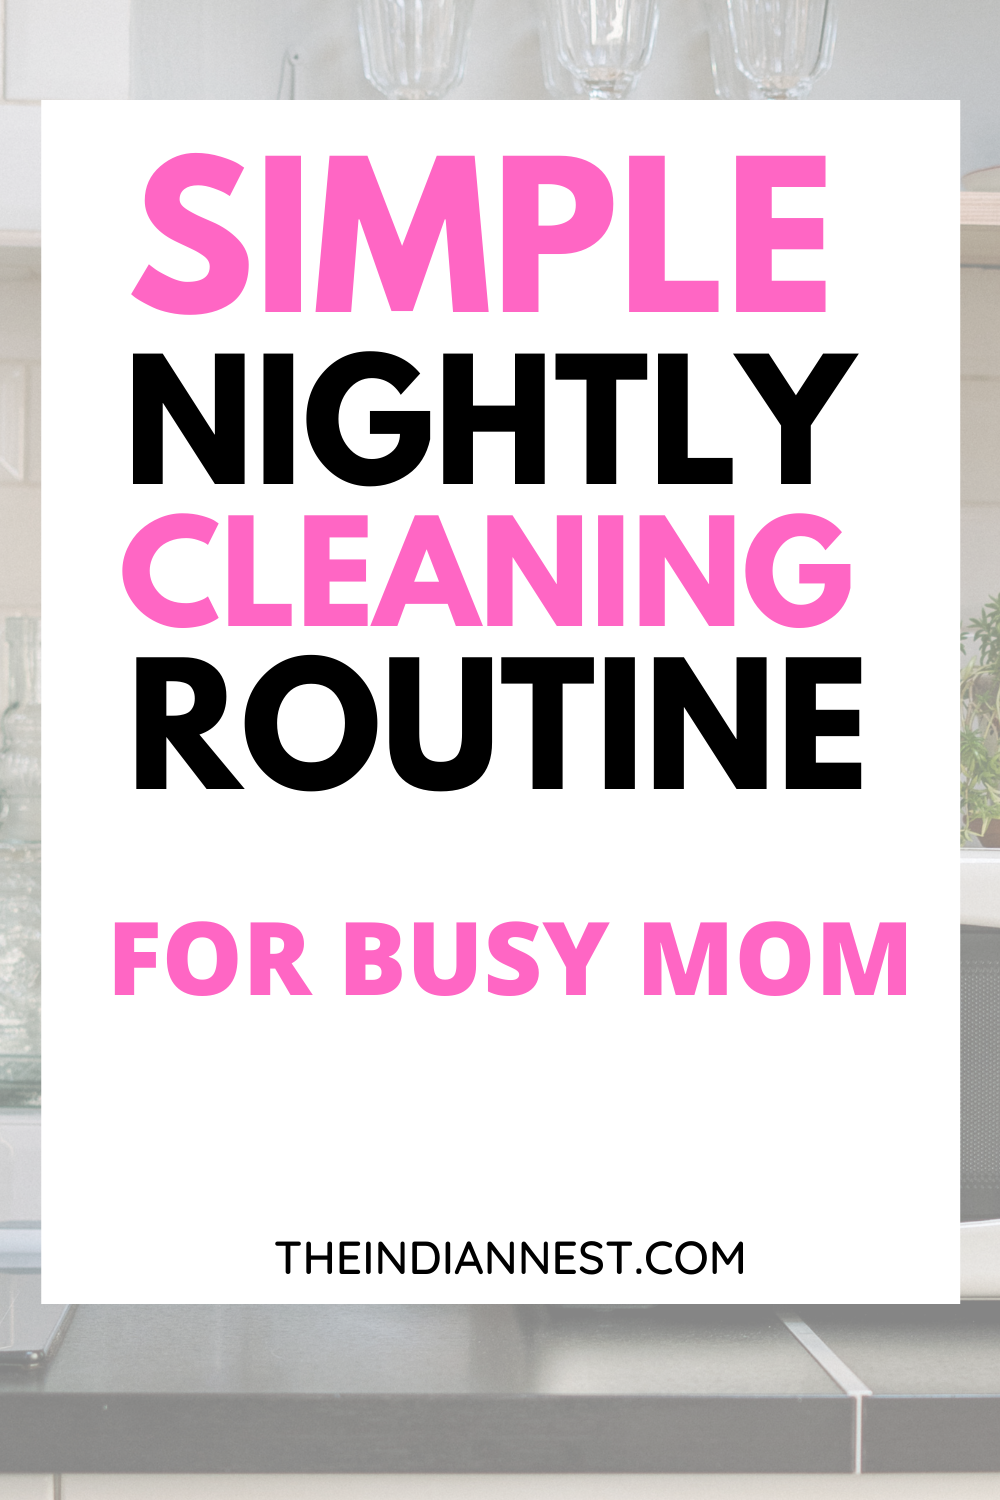 What is the night cleaning schedule? How to Start A Simple Evening Cleaning Routine? How do you clean your house at night? Waking up to a messy house is just plain stressful. The solution to this problem get it picked up before bed time. By following evening & nighttime cleaning routines or just routines in general, you can prep for the next morning, Start a nighttime cleaning routine to make your mornings simple and easy! 